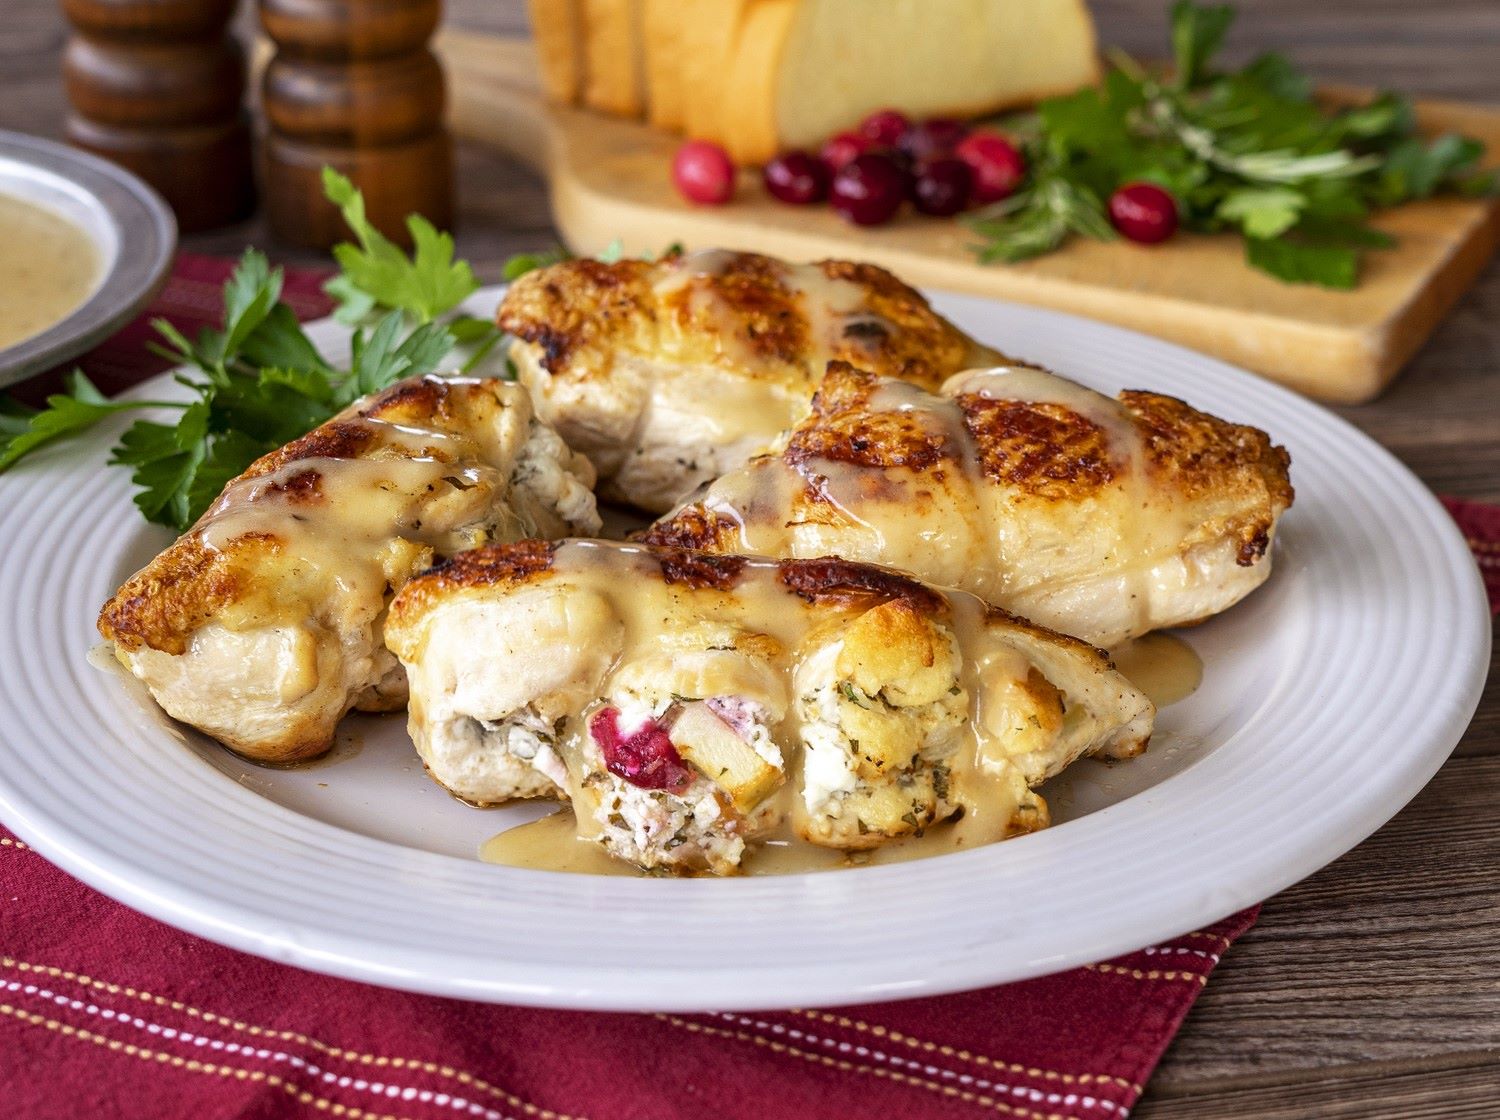 Spinach and Feta Stuffed Chicken with Lemon Sage Sauce Recipe